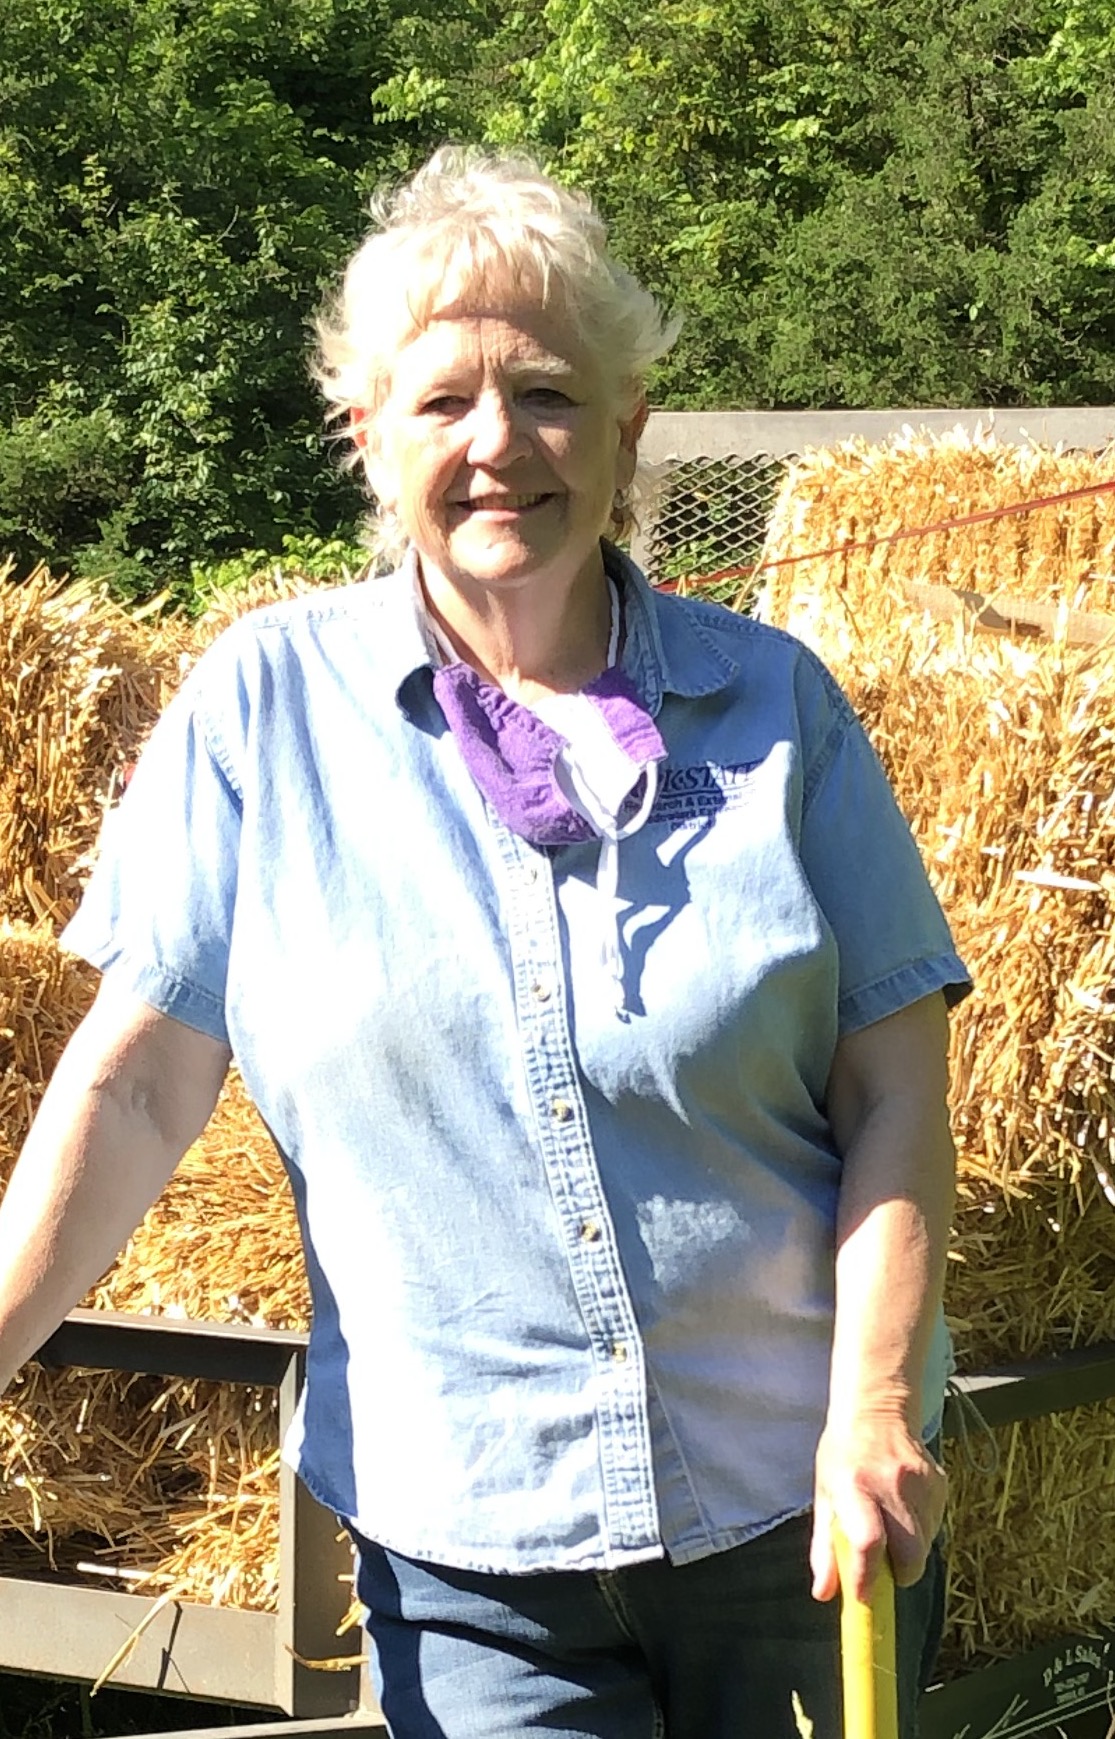 Jody Holtaus, standing in front of a flatbed with bales of barley straw